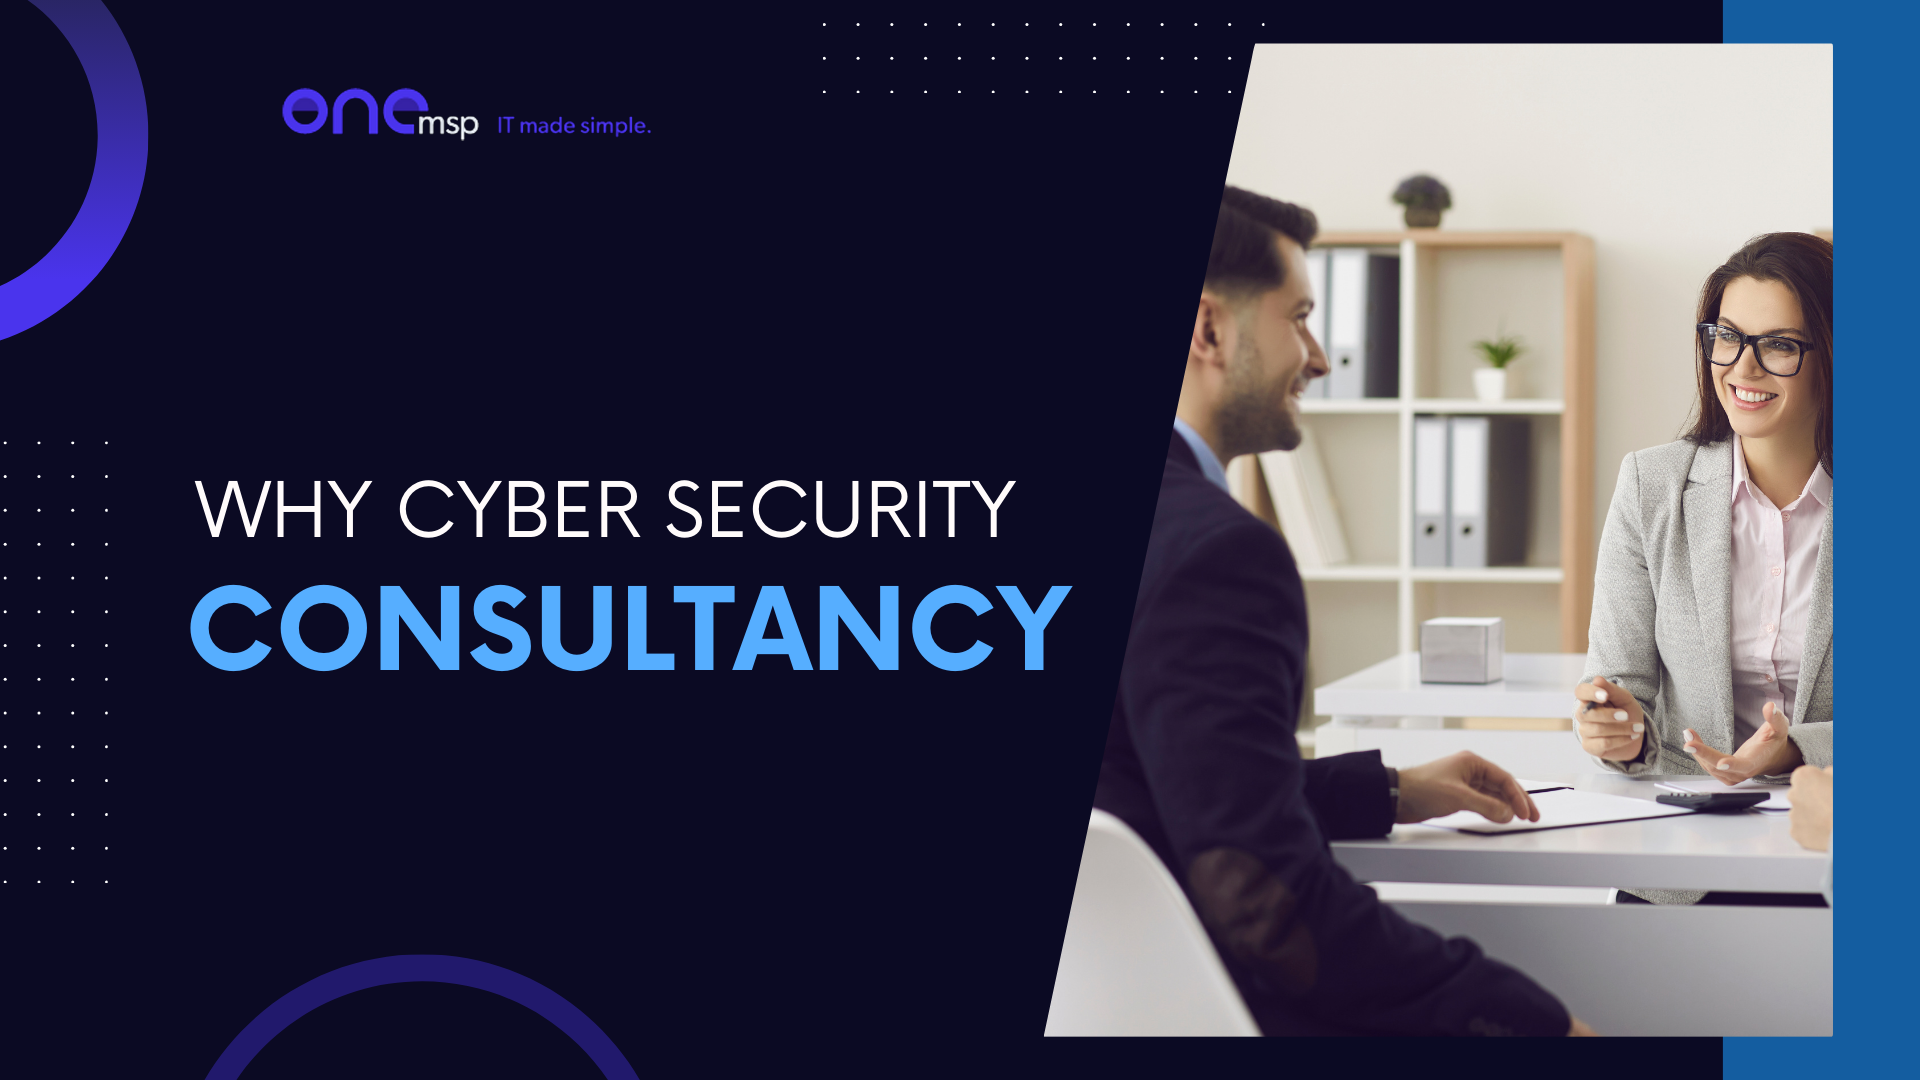 why-cyber-security-consultancy-banner-consultant-discussing-client